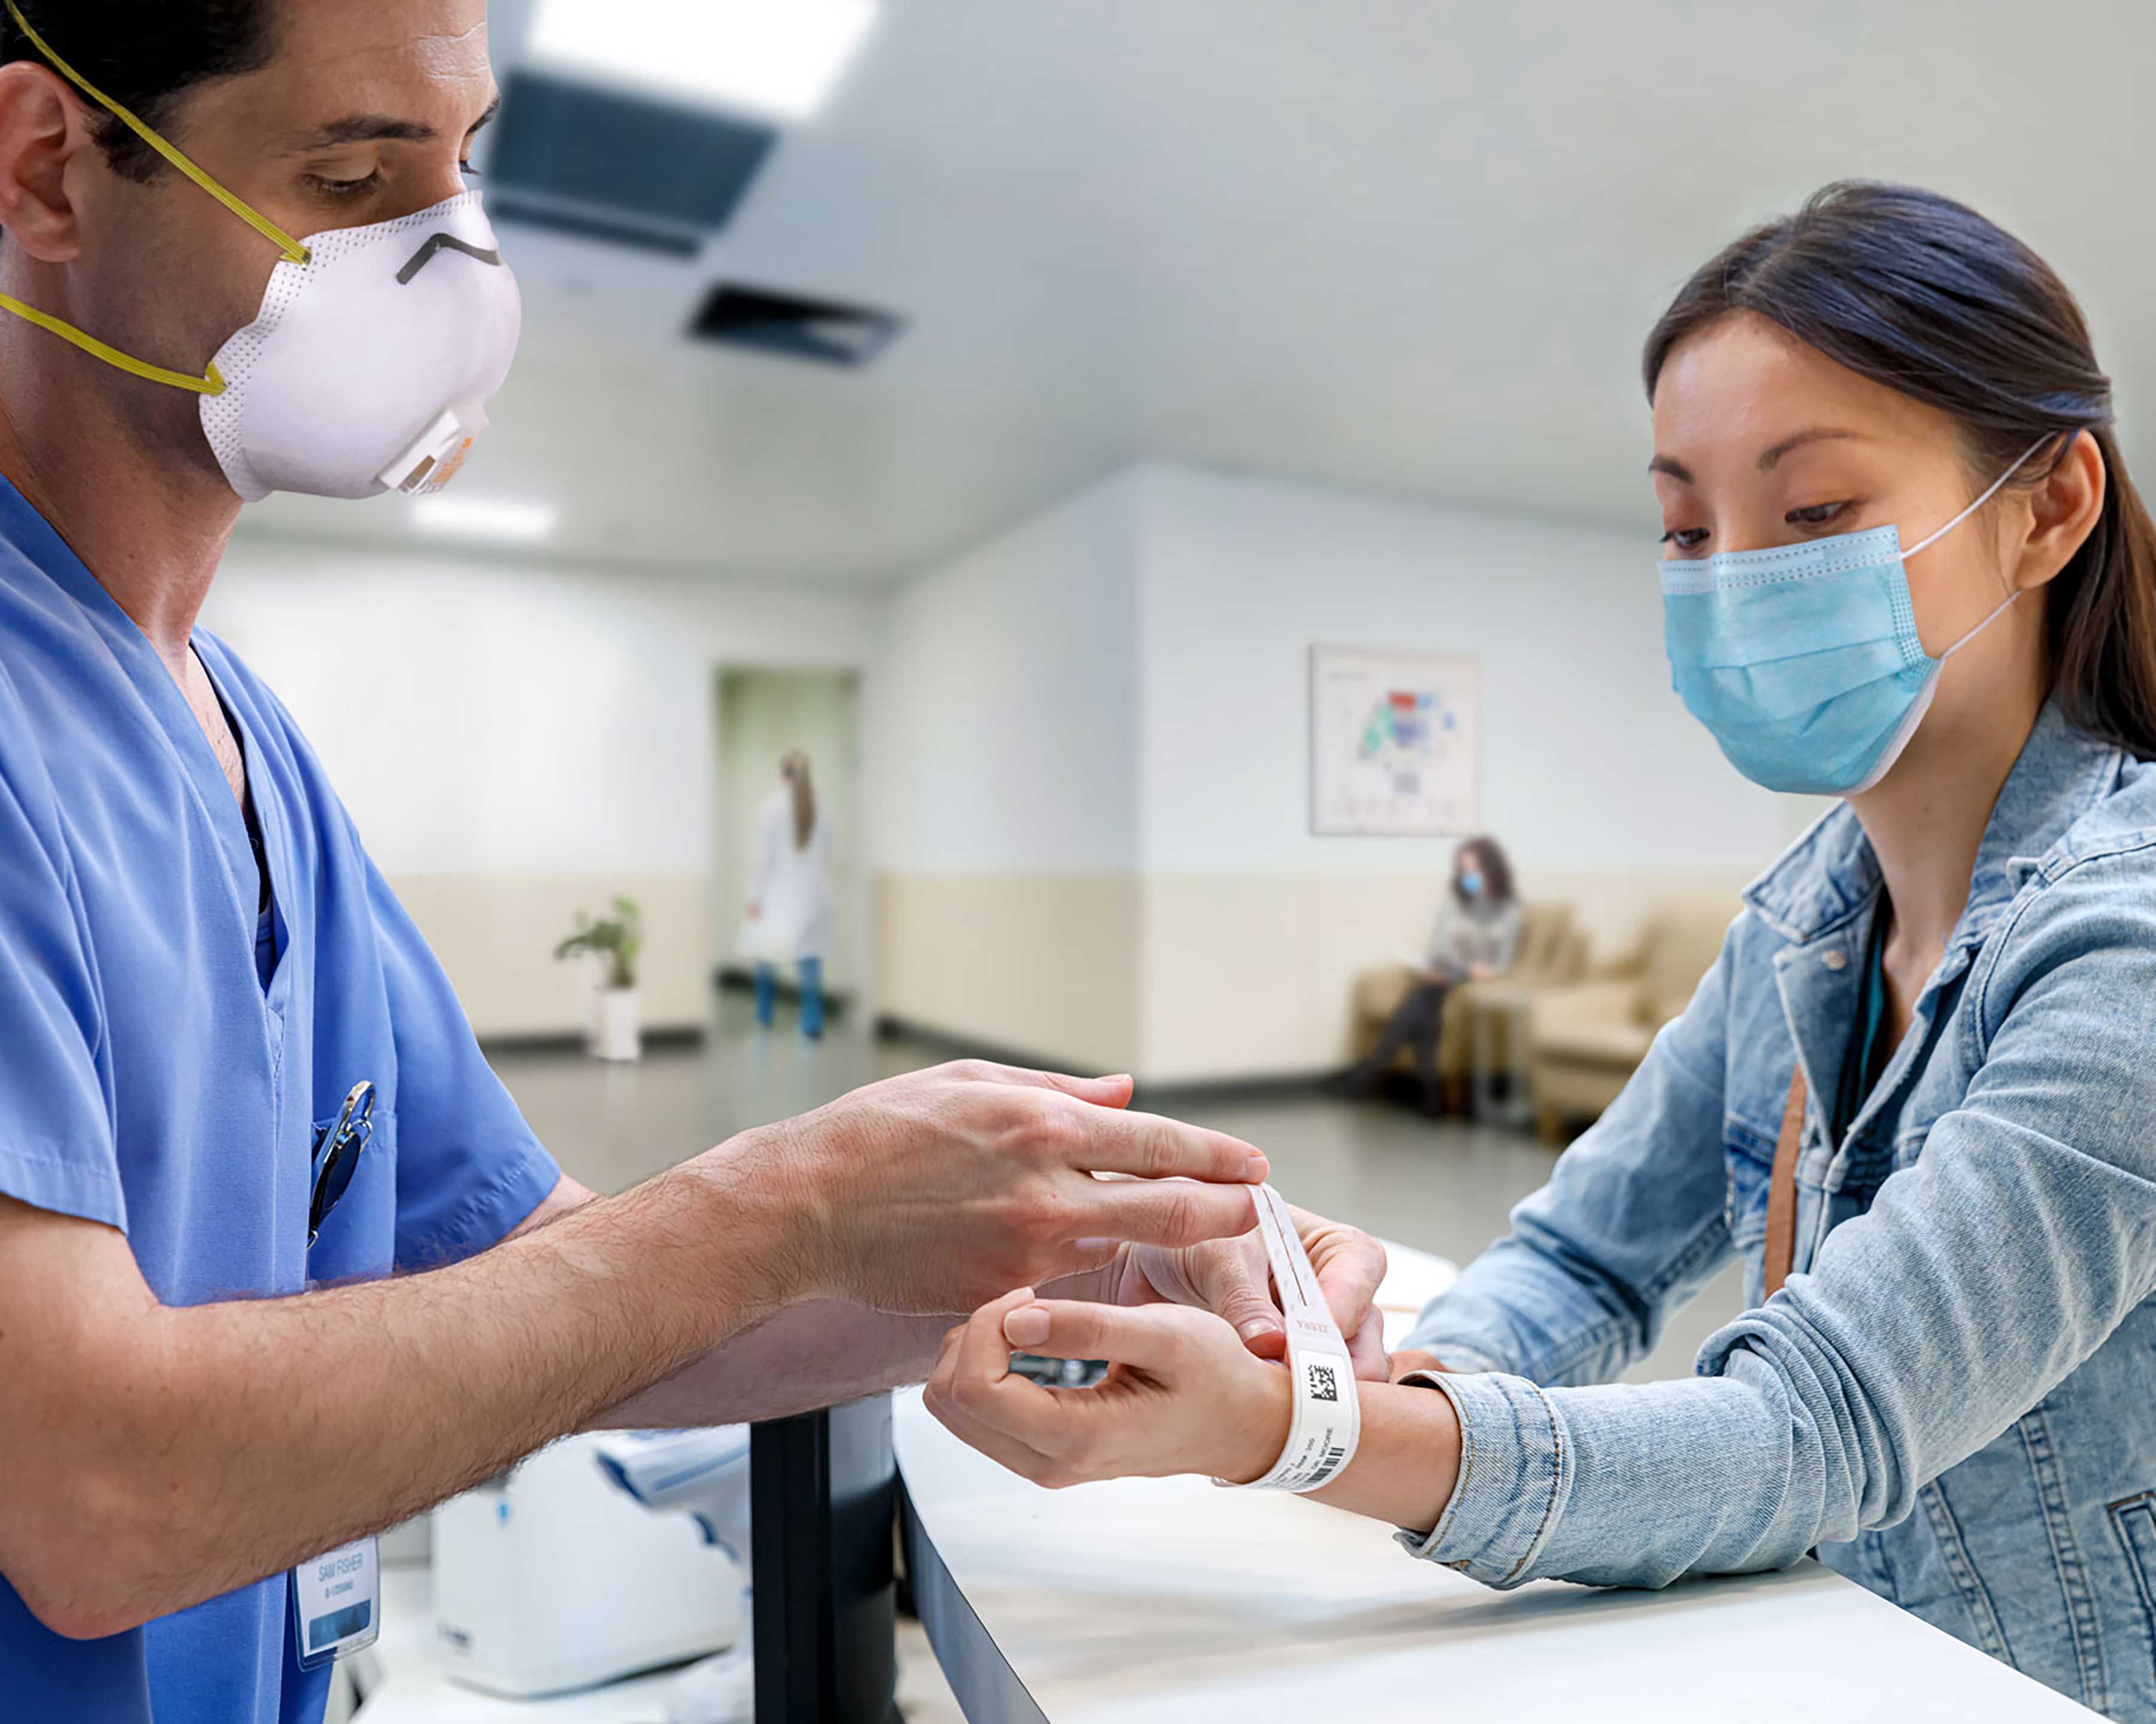 Masked nurse putting an admissions wristband on a patient's hand